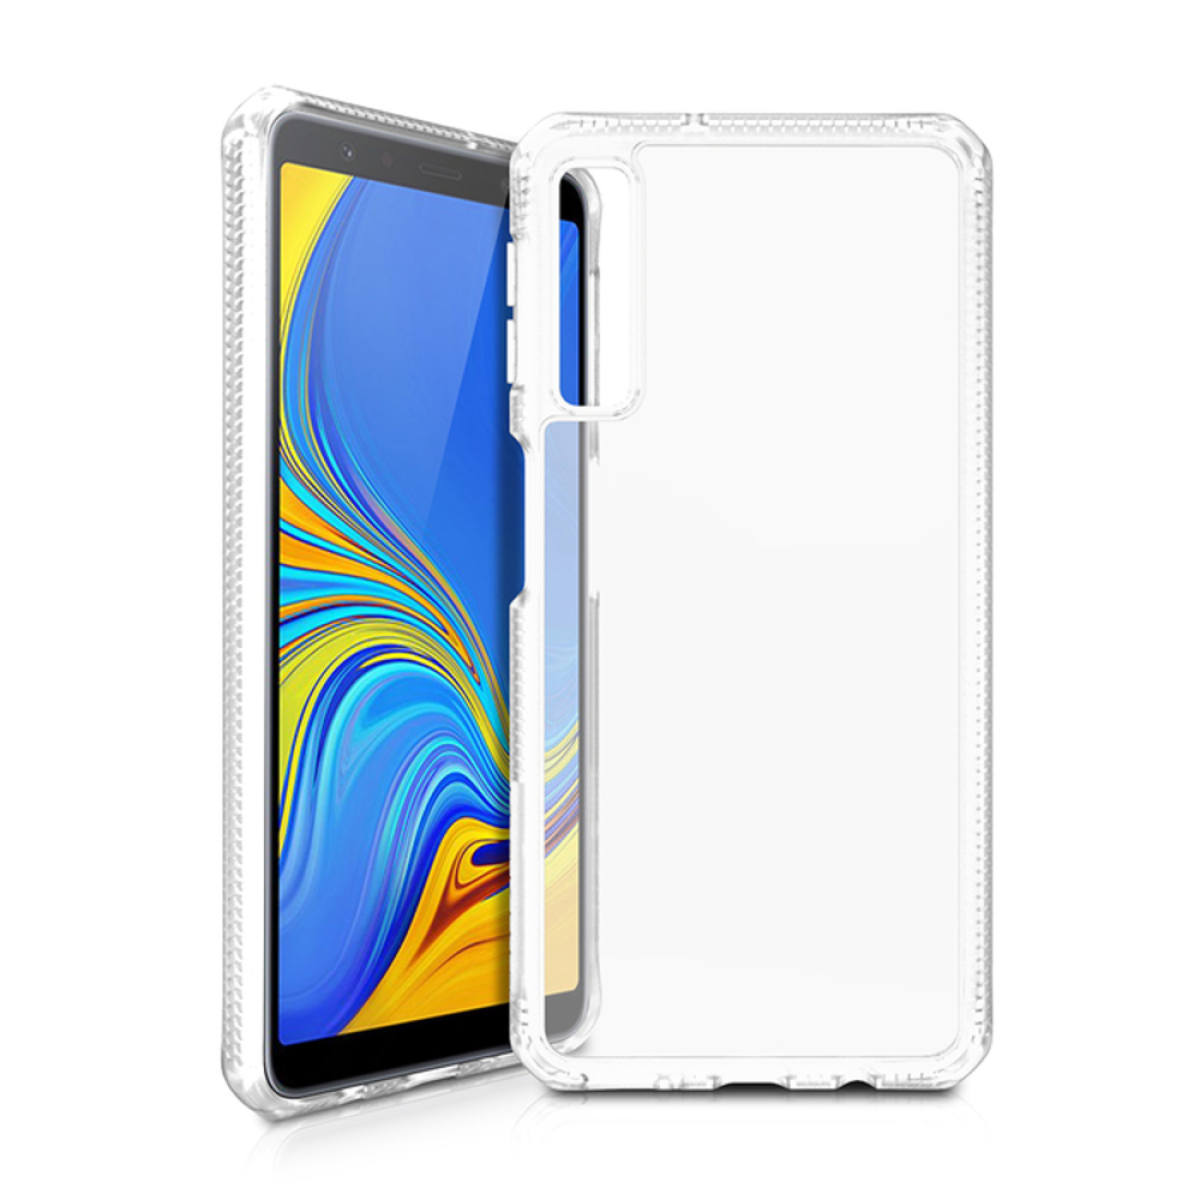 Galaxy Hybrid Not Cover, ITSKINS 18 available A7 MK Universal, II transparent, Full Universal,